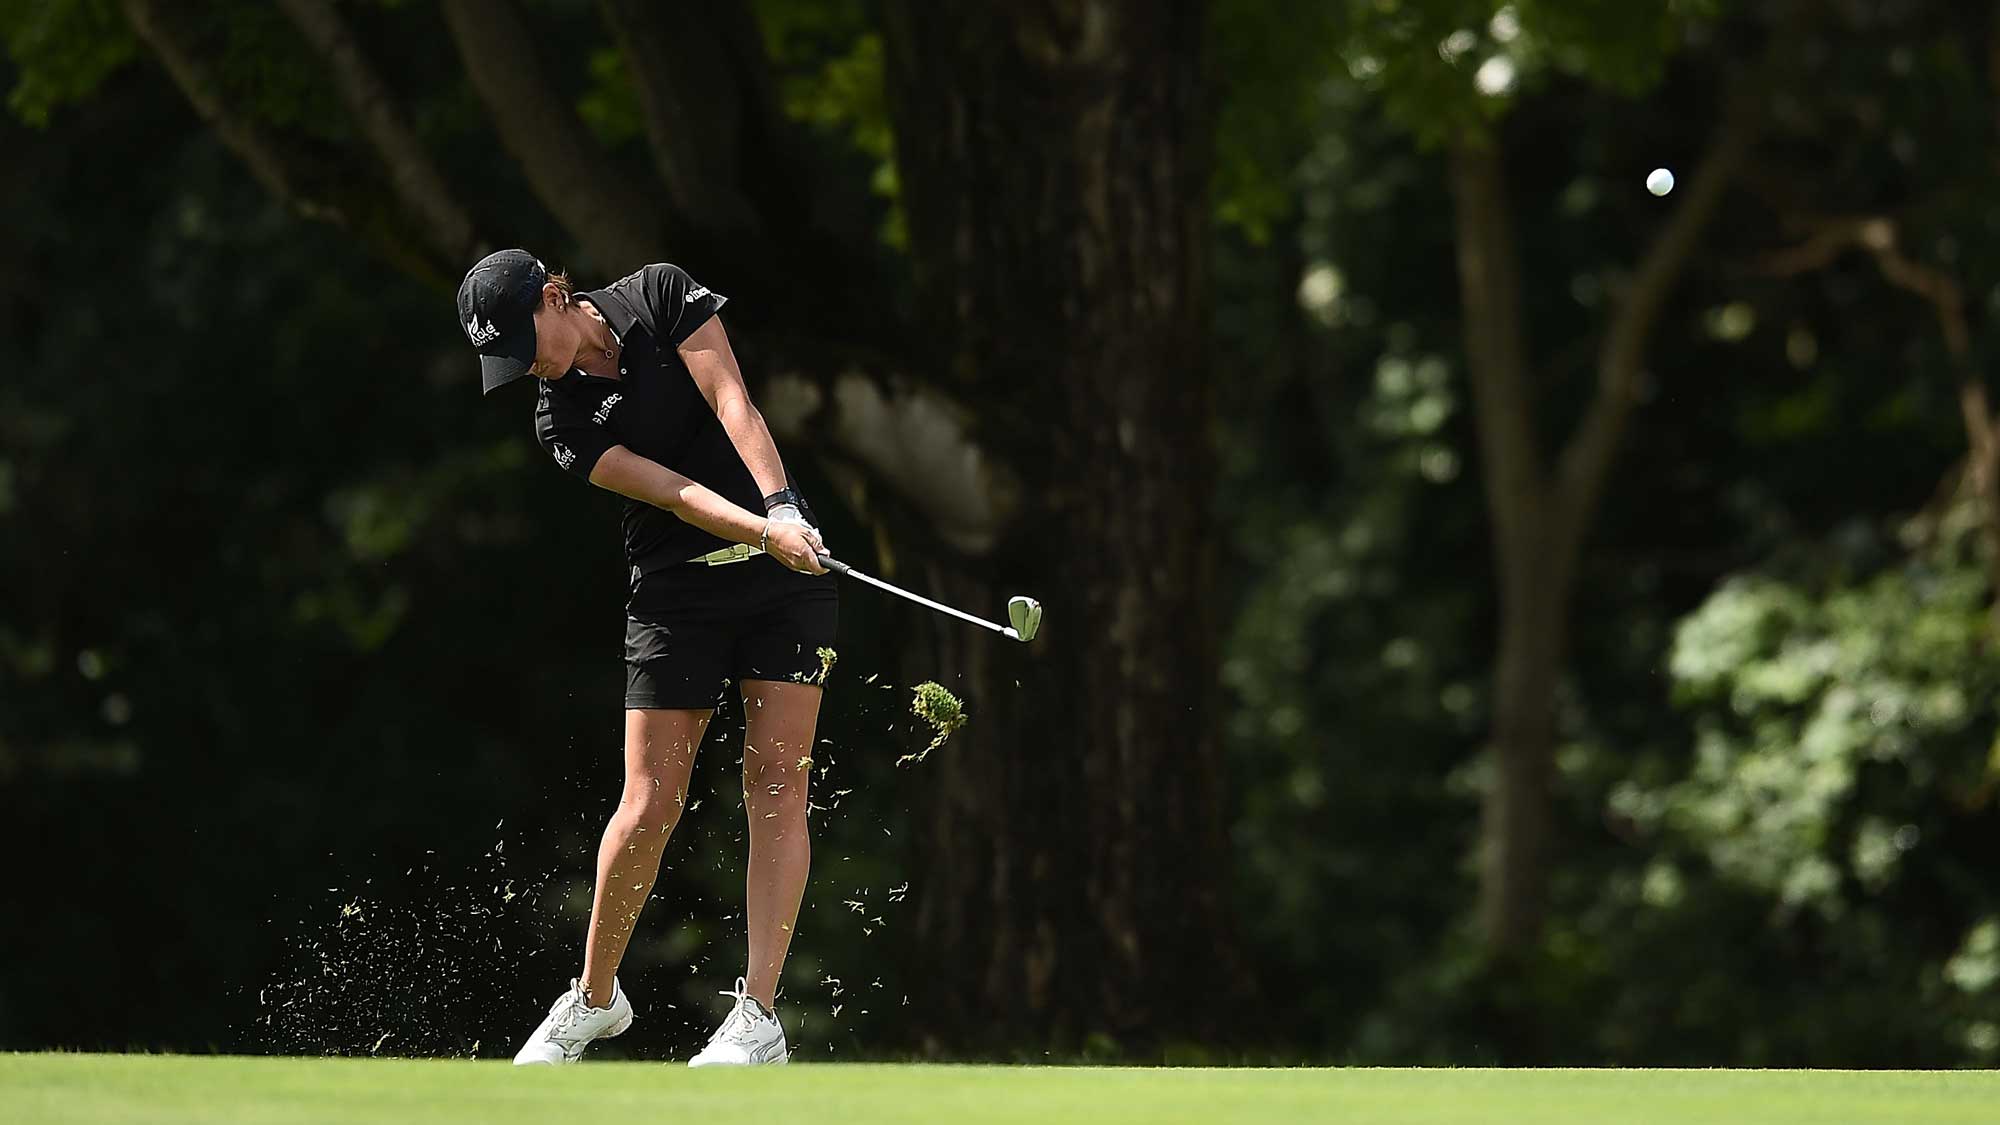 Lee-Anne Pace of South Africa hits her second shot on the first hole during the final round of the Meijer LPGA Classic